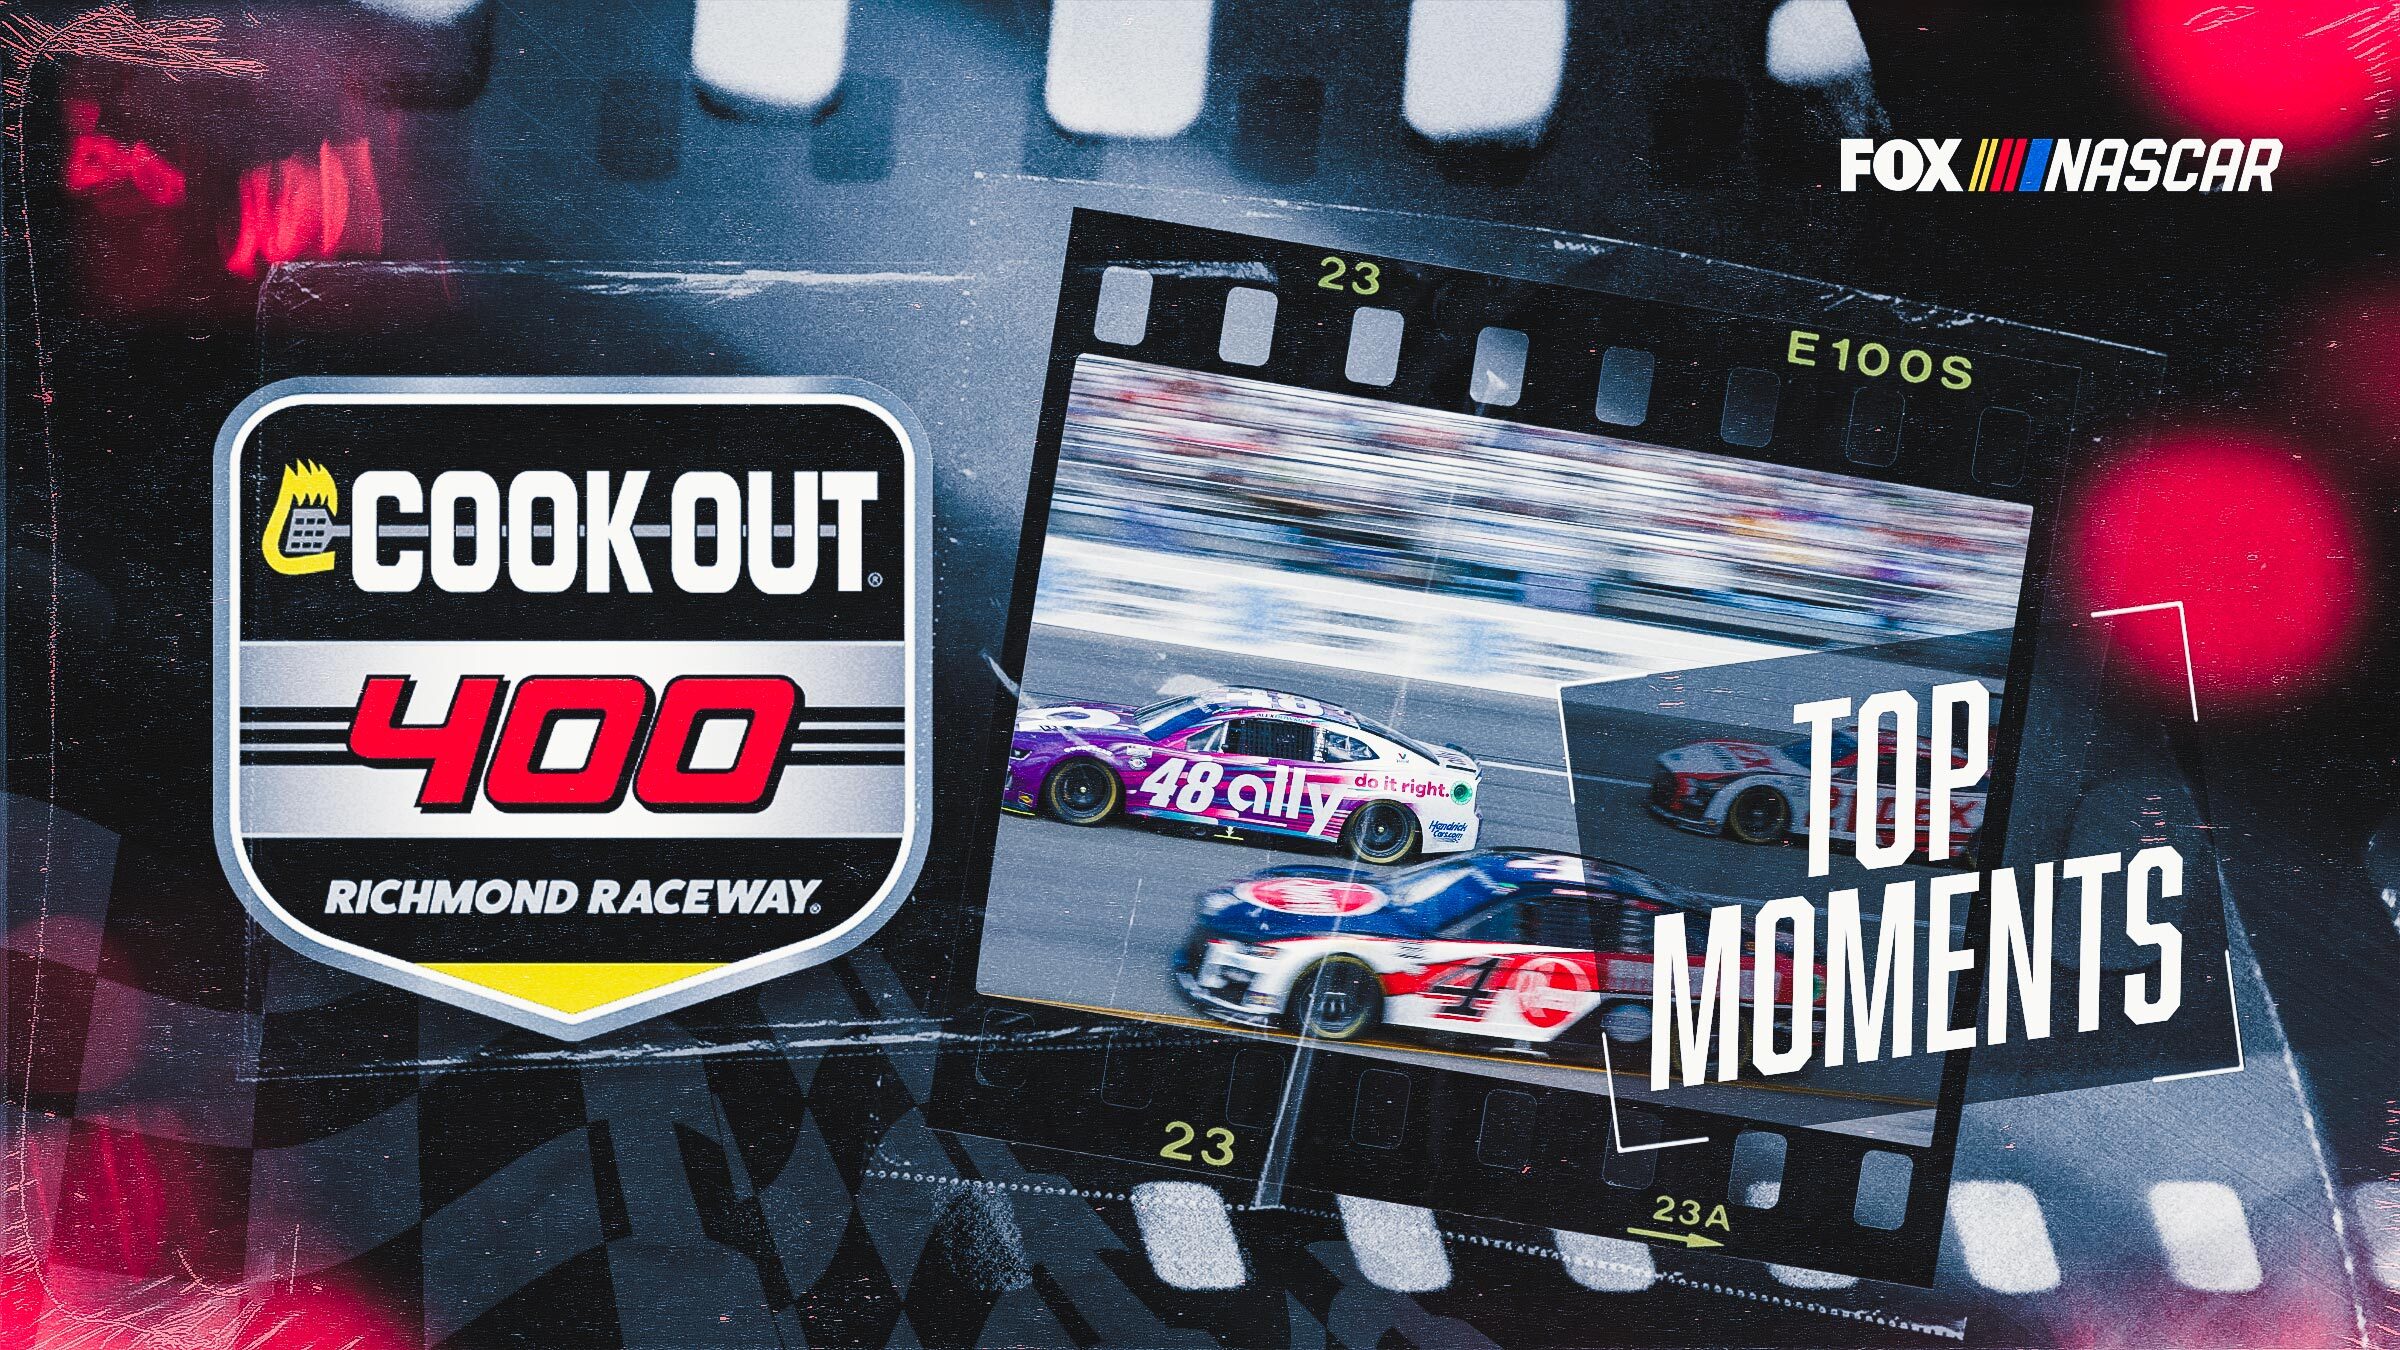 NASCAR live updates: Top moments from Cook Out 400